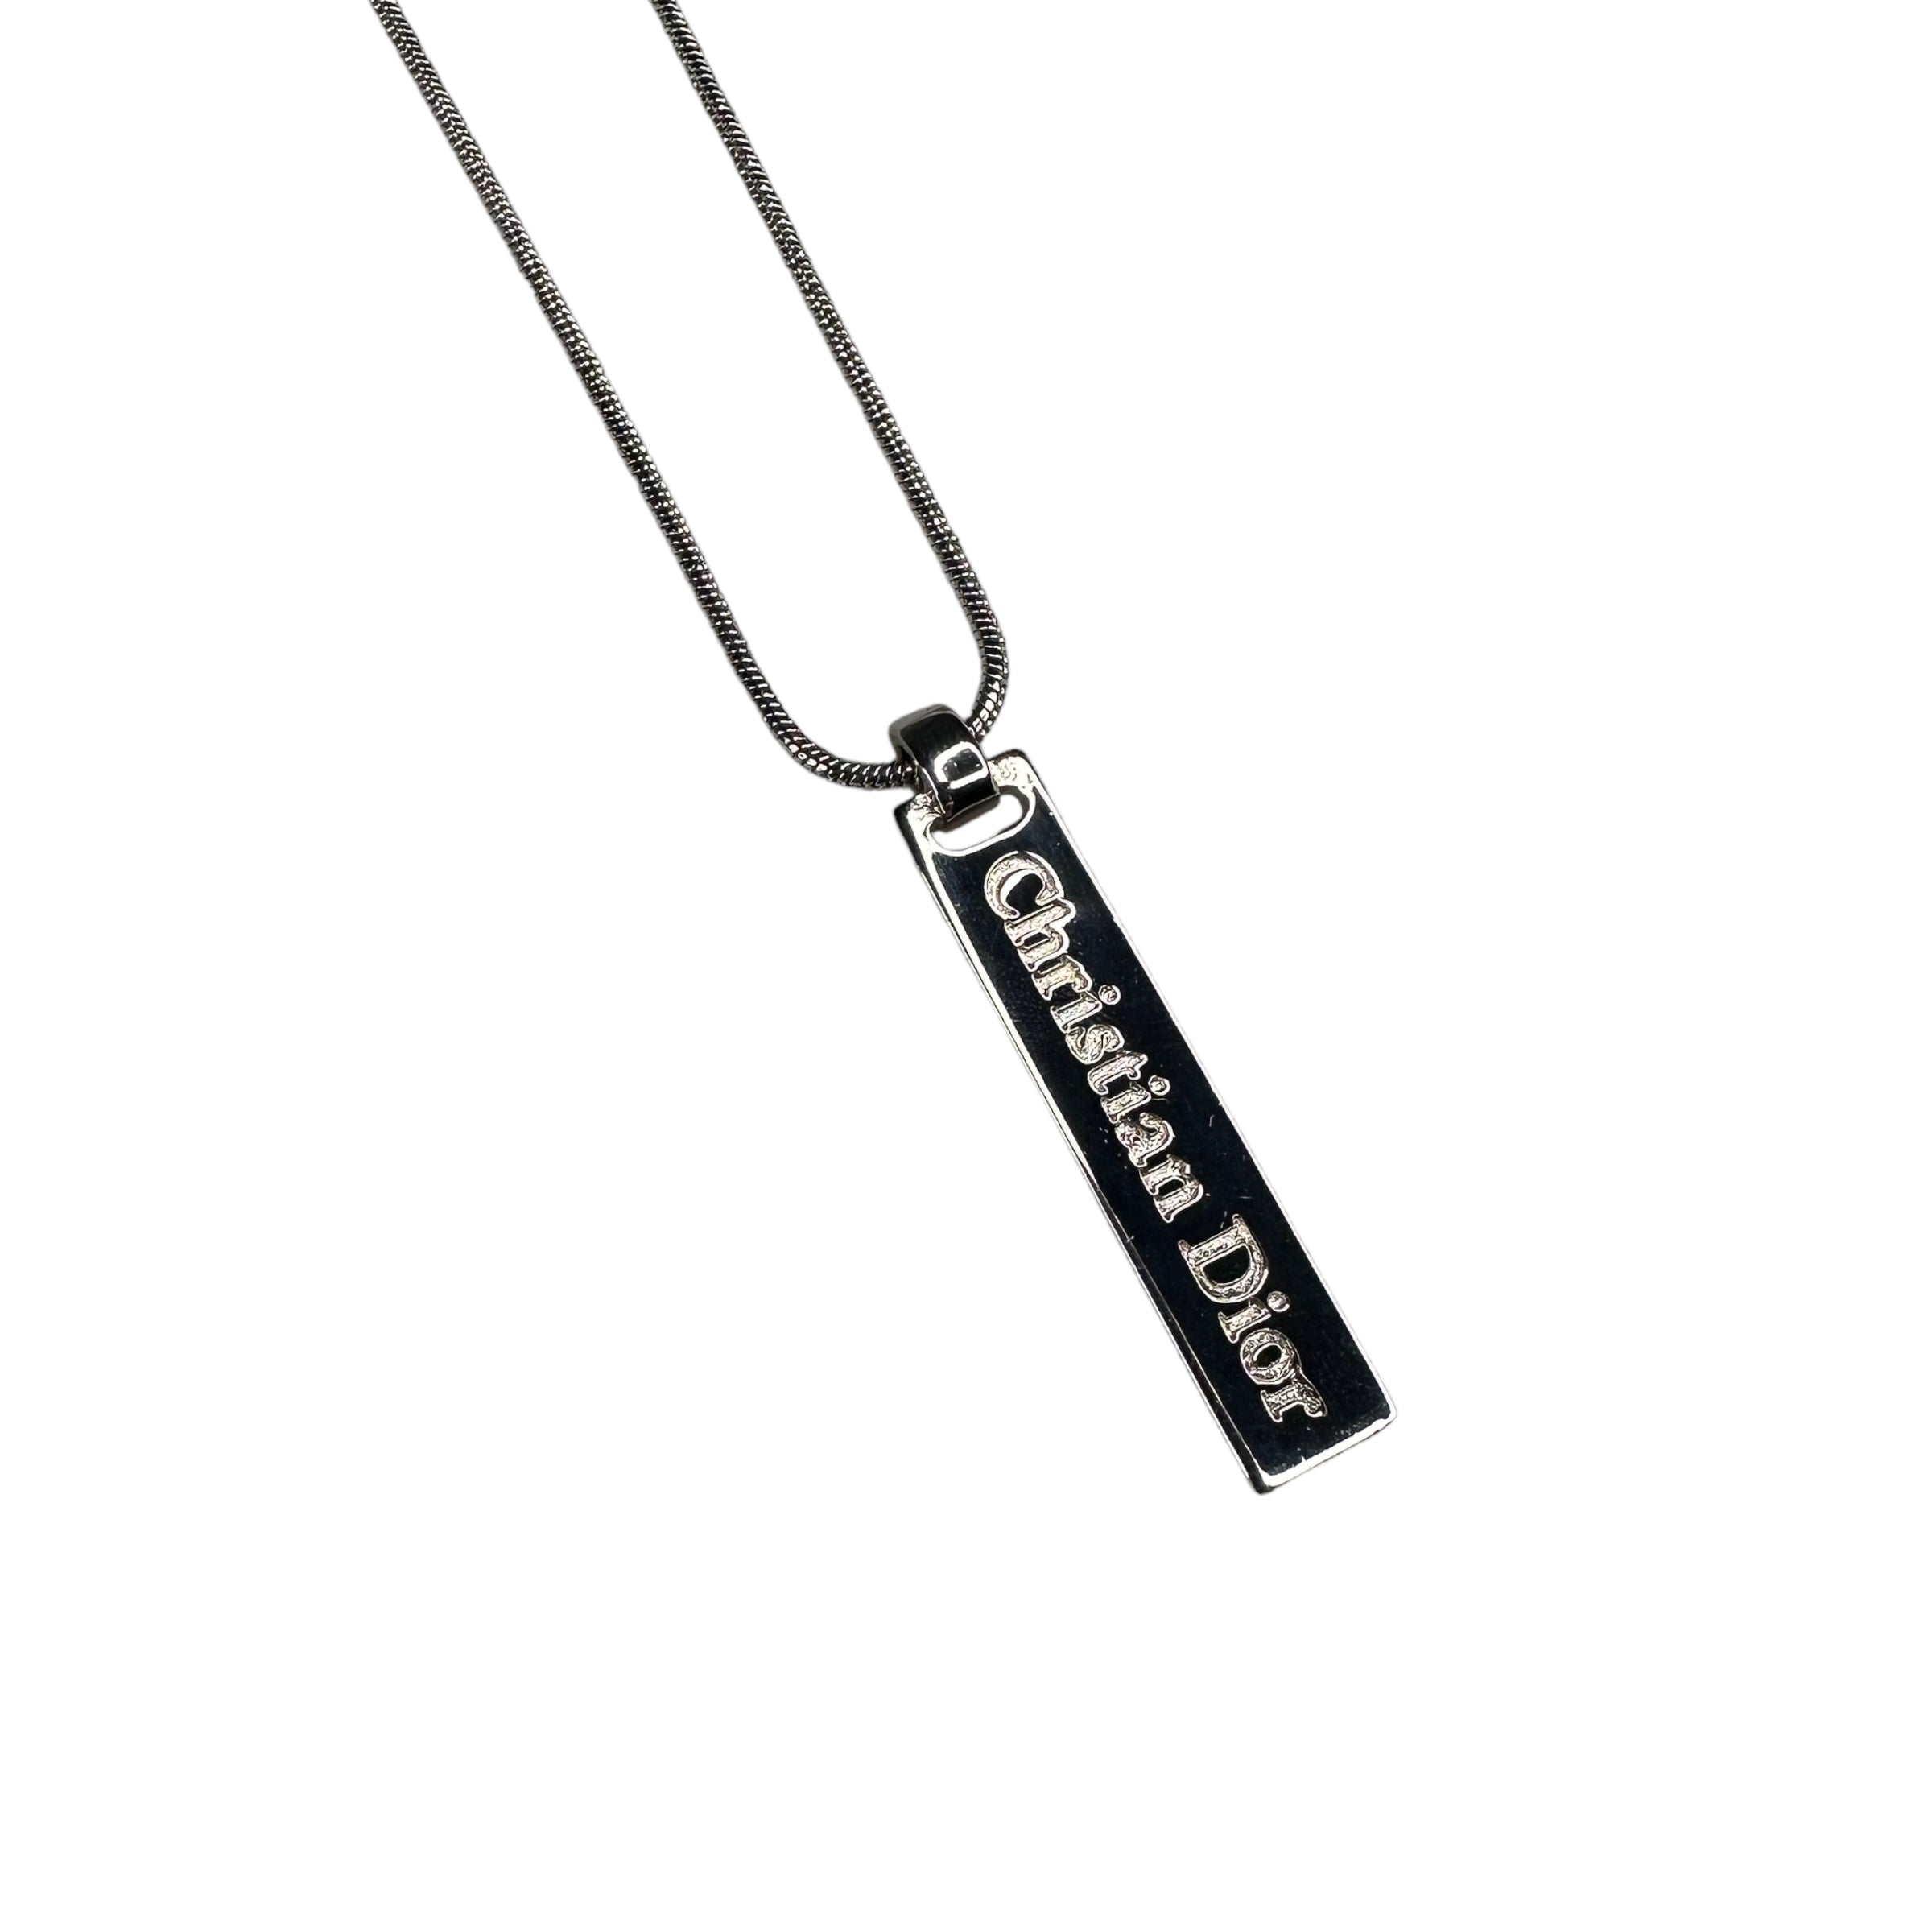 DIOR "CHRISTIAN DIOR" ENGRAVED PLATE SILVER-PLATED NECKLACE